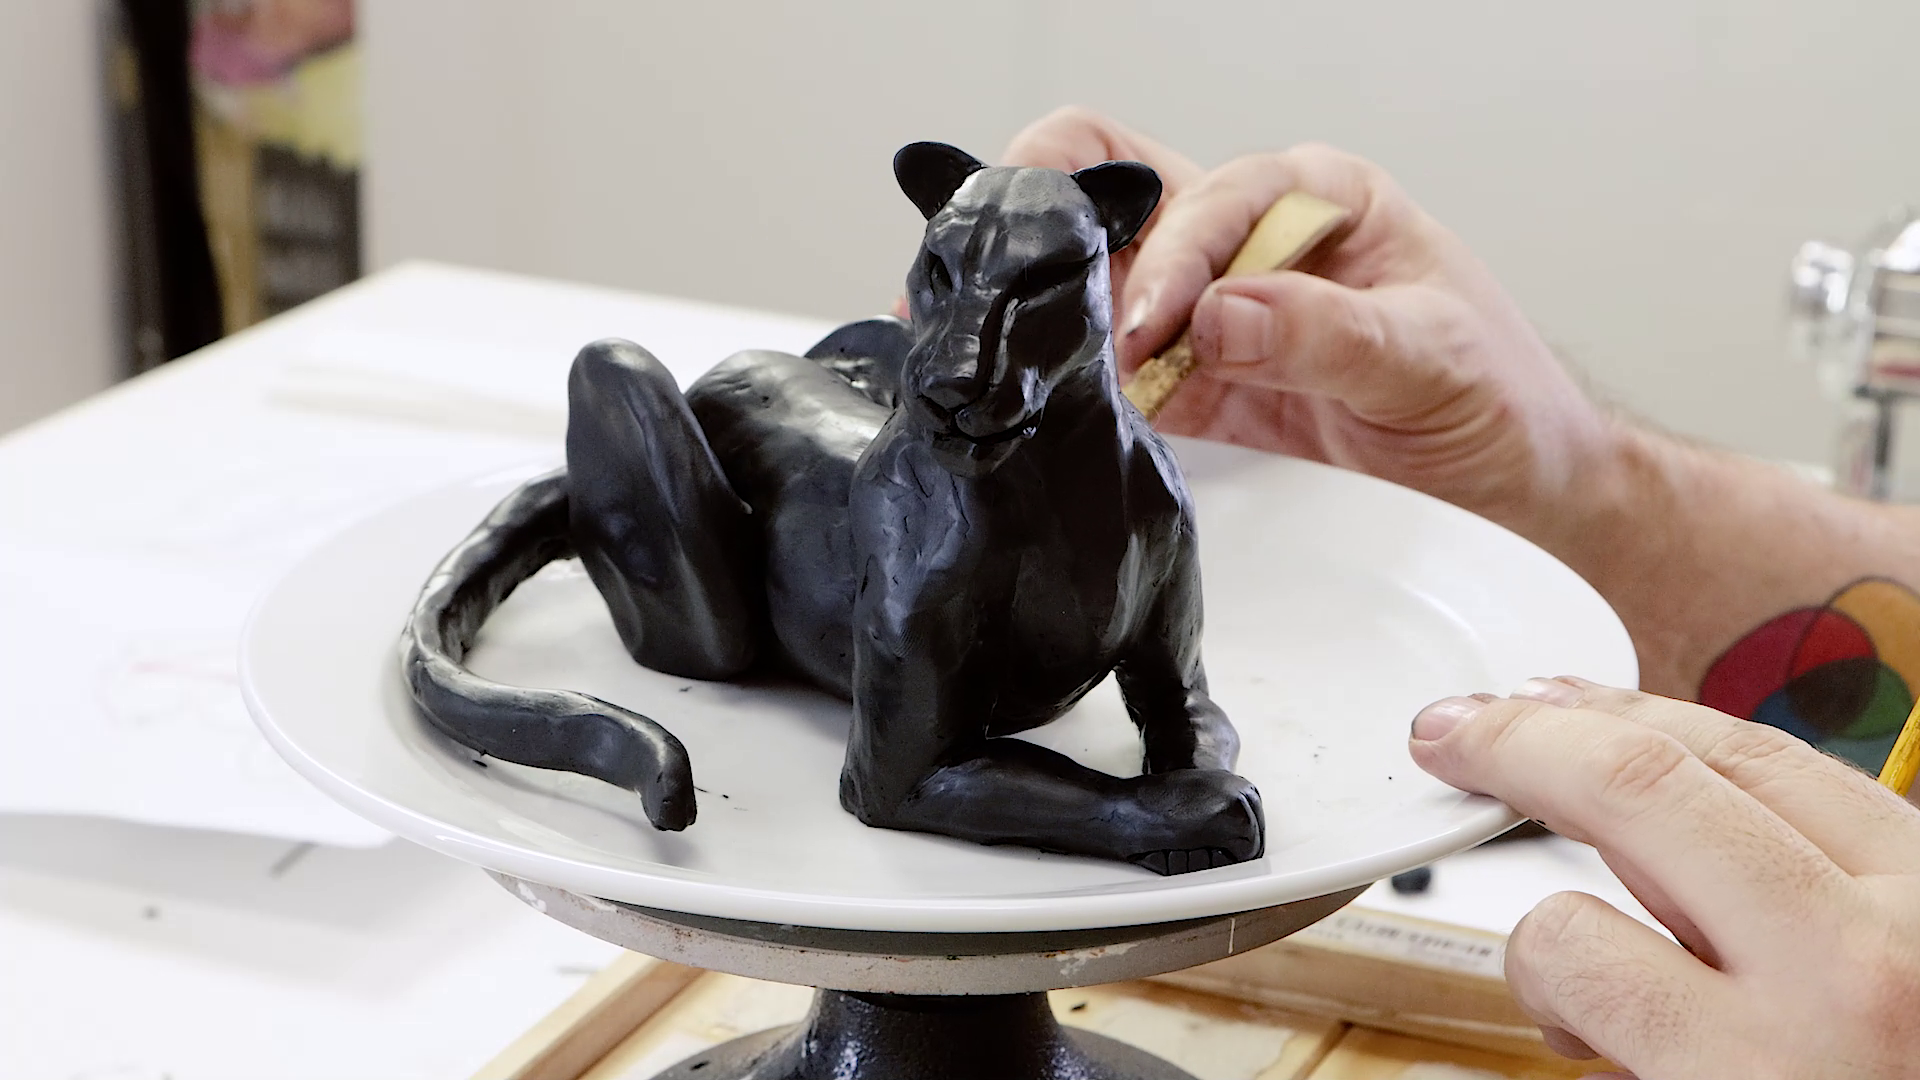 Smoothing out the texture and final touches of the panther sculpture